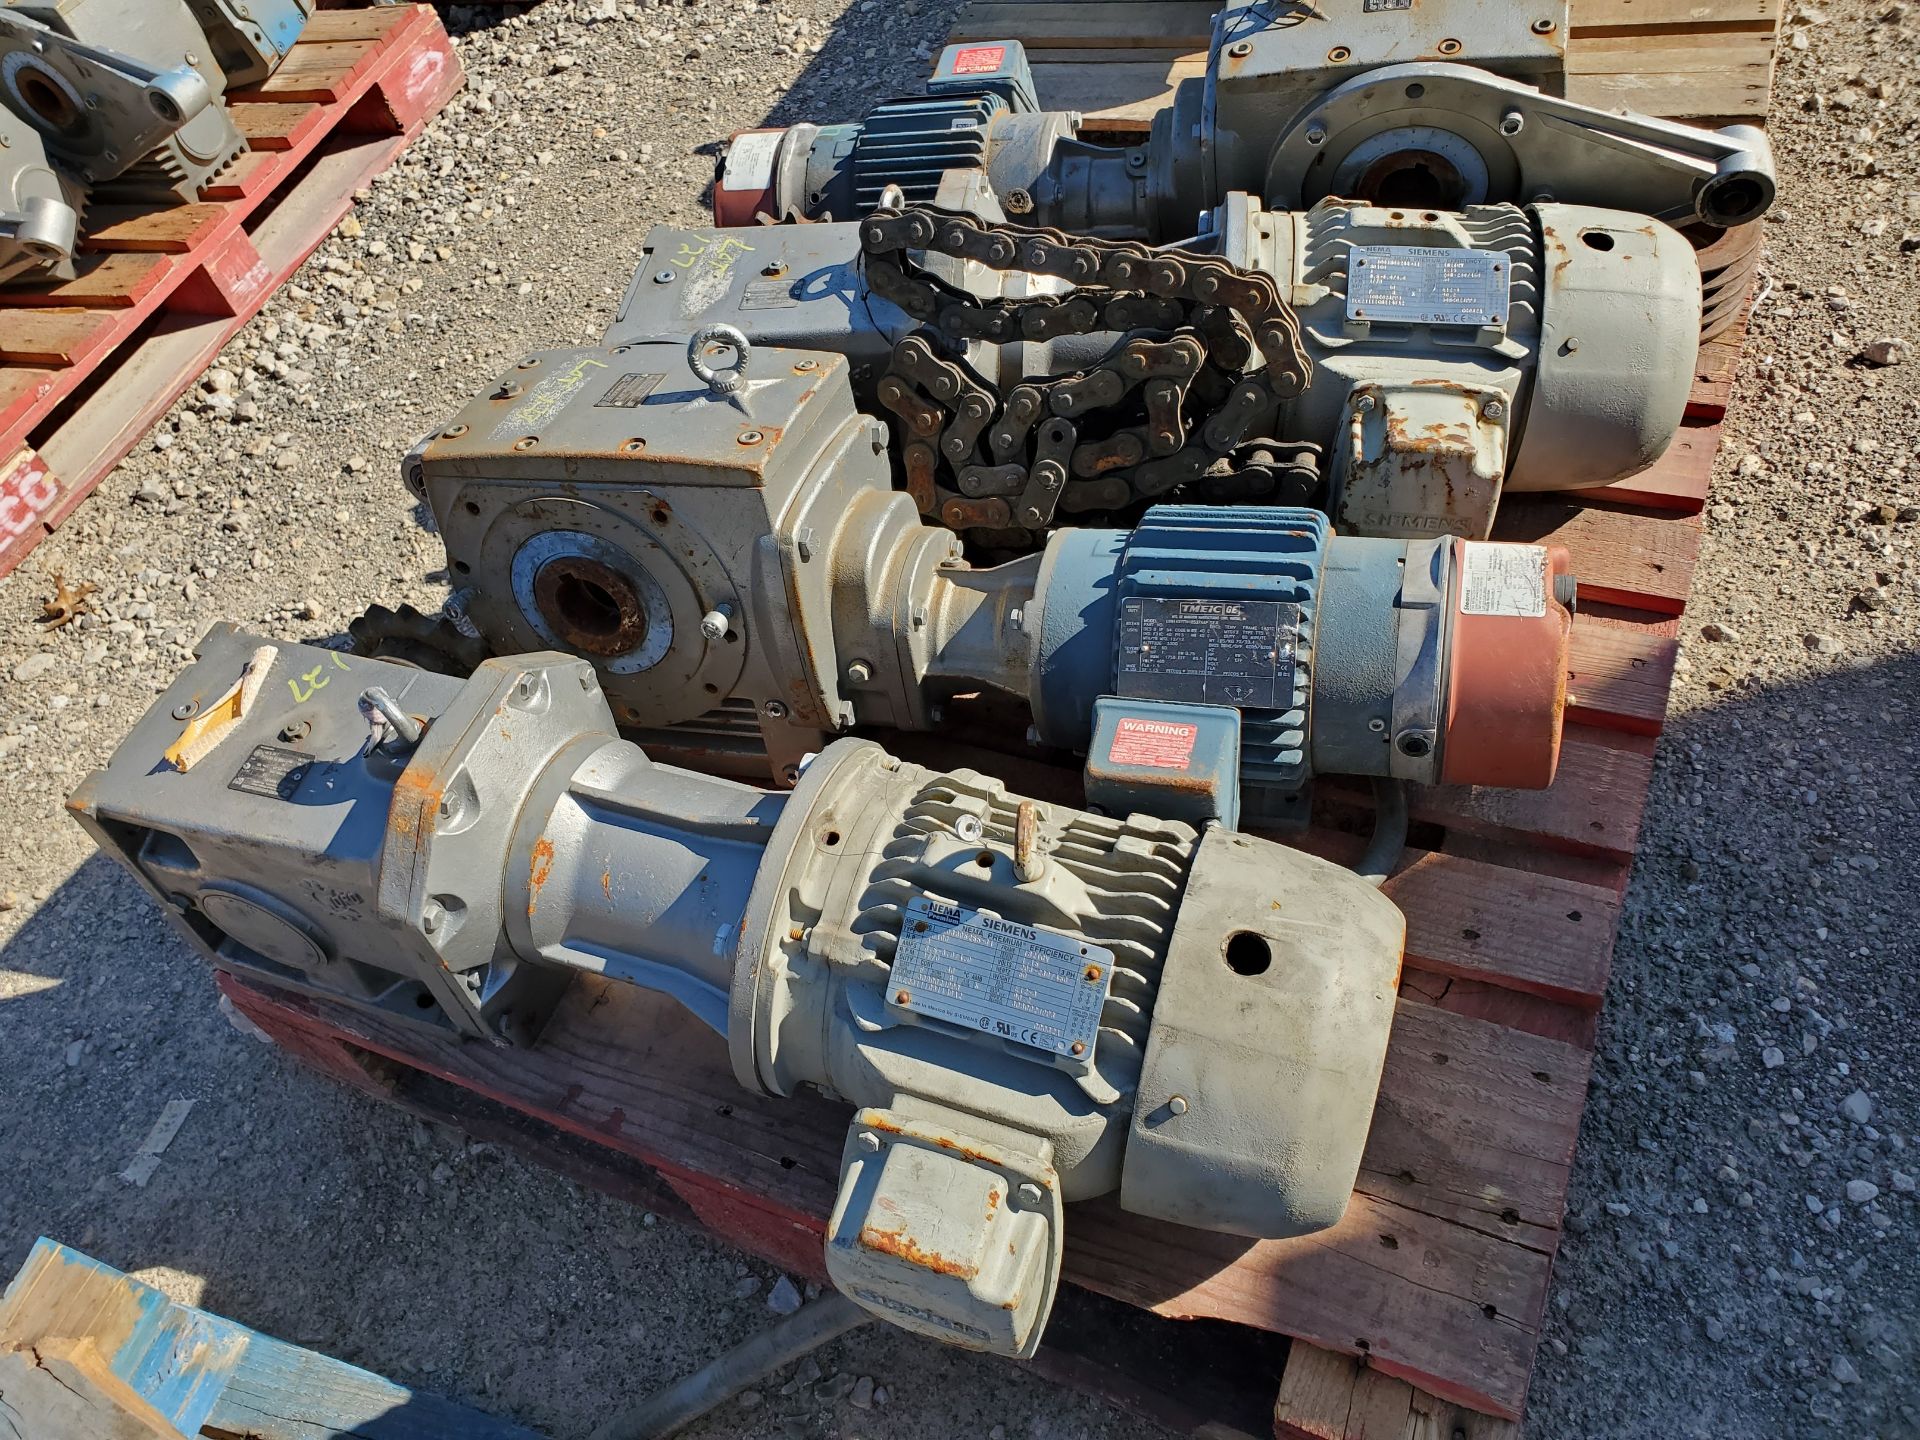 (4) NORD DRIVESYSTEMS 25.39:1 GEAR REDUCERS WITH GE 1 HP ELECTRIC MOTORS - Image 9 of 9